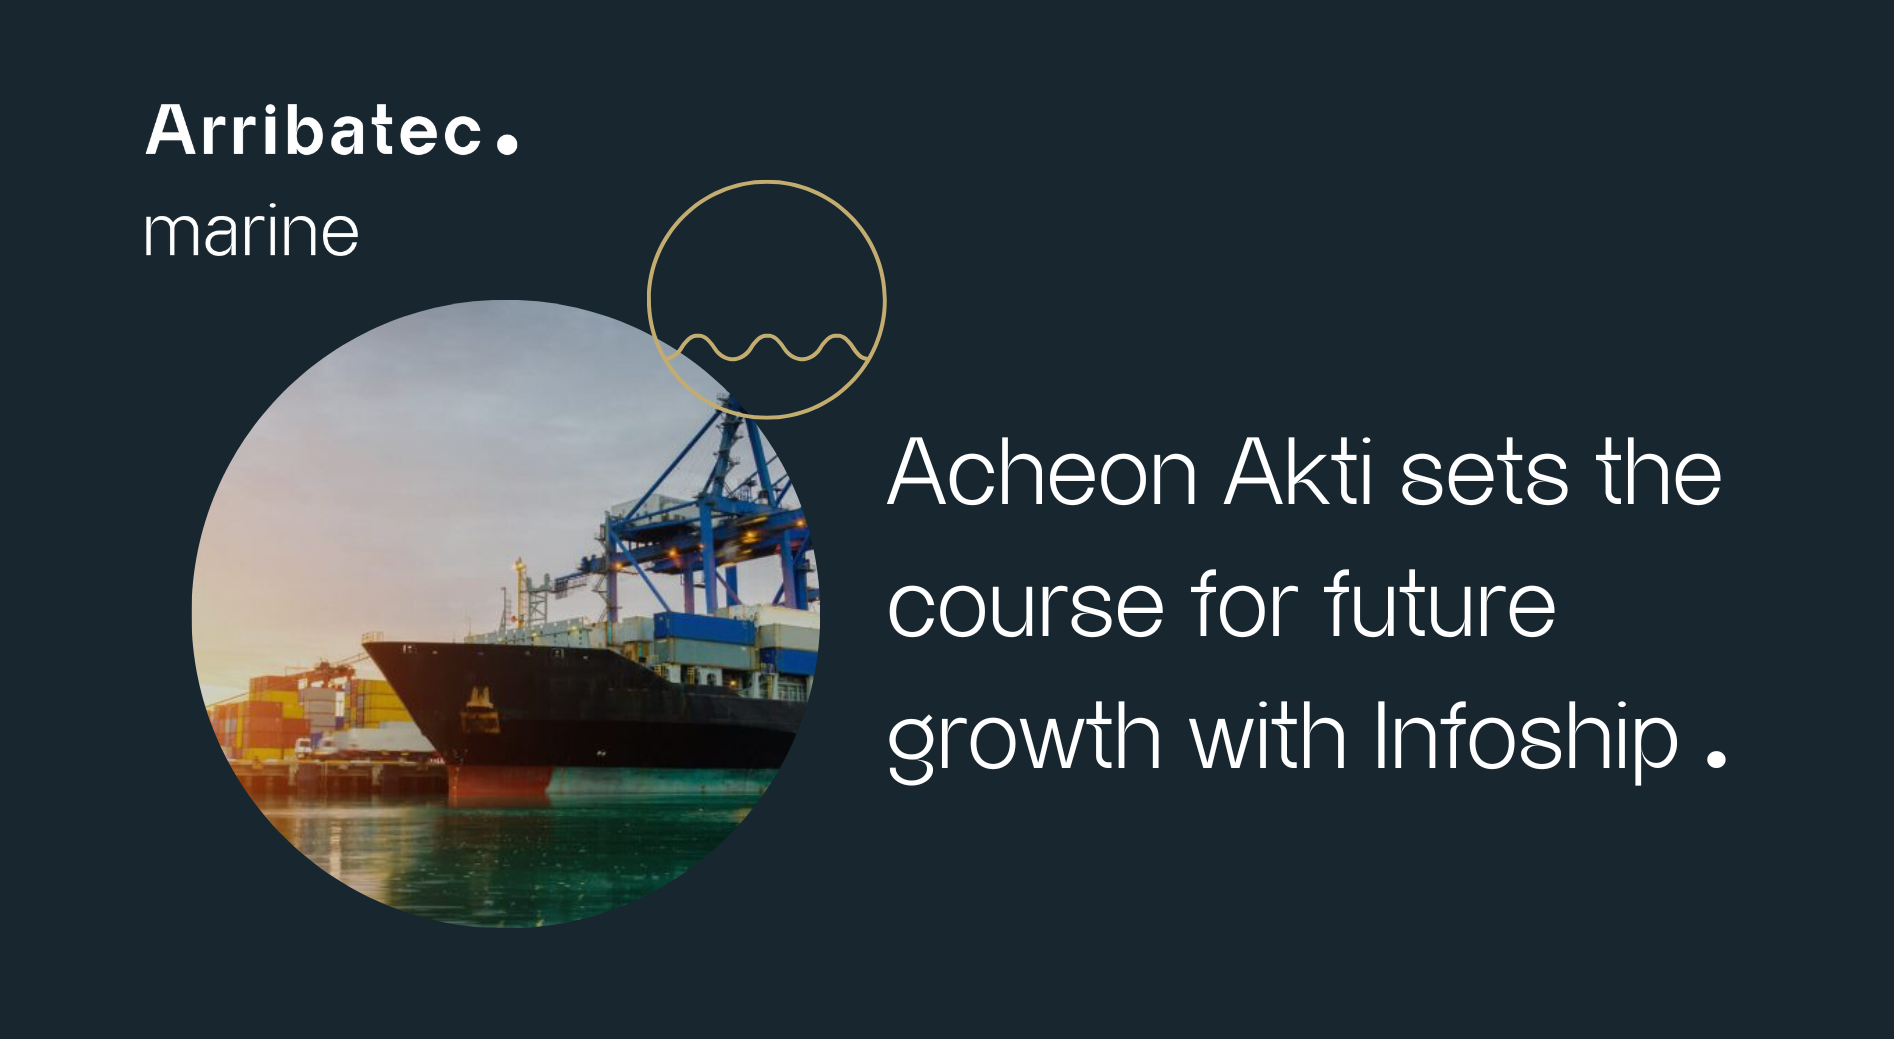 Acheon Akti sets the course for future growth with Infoship